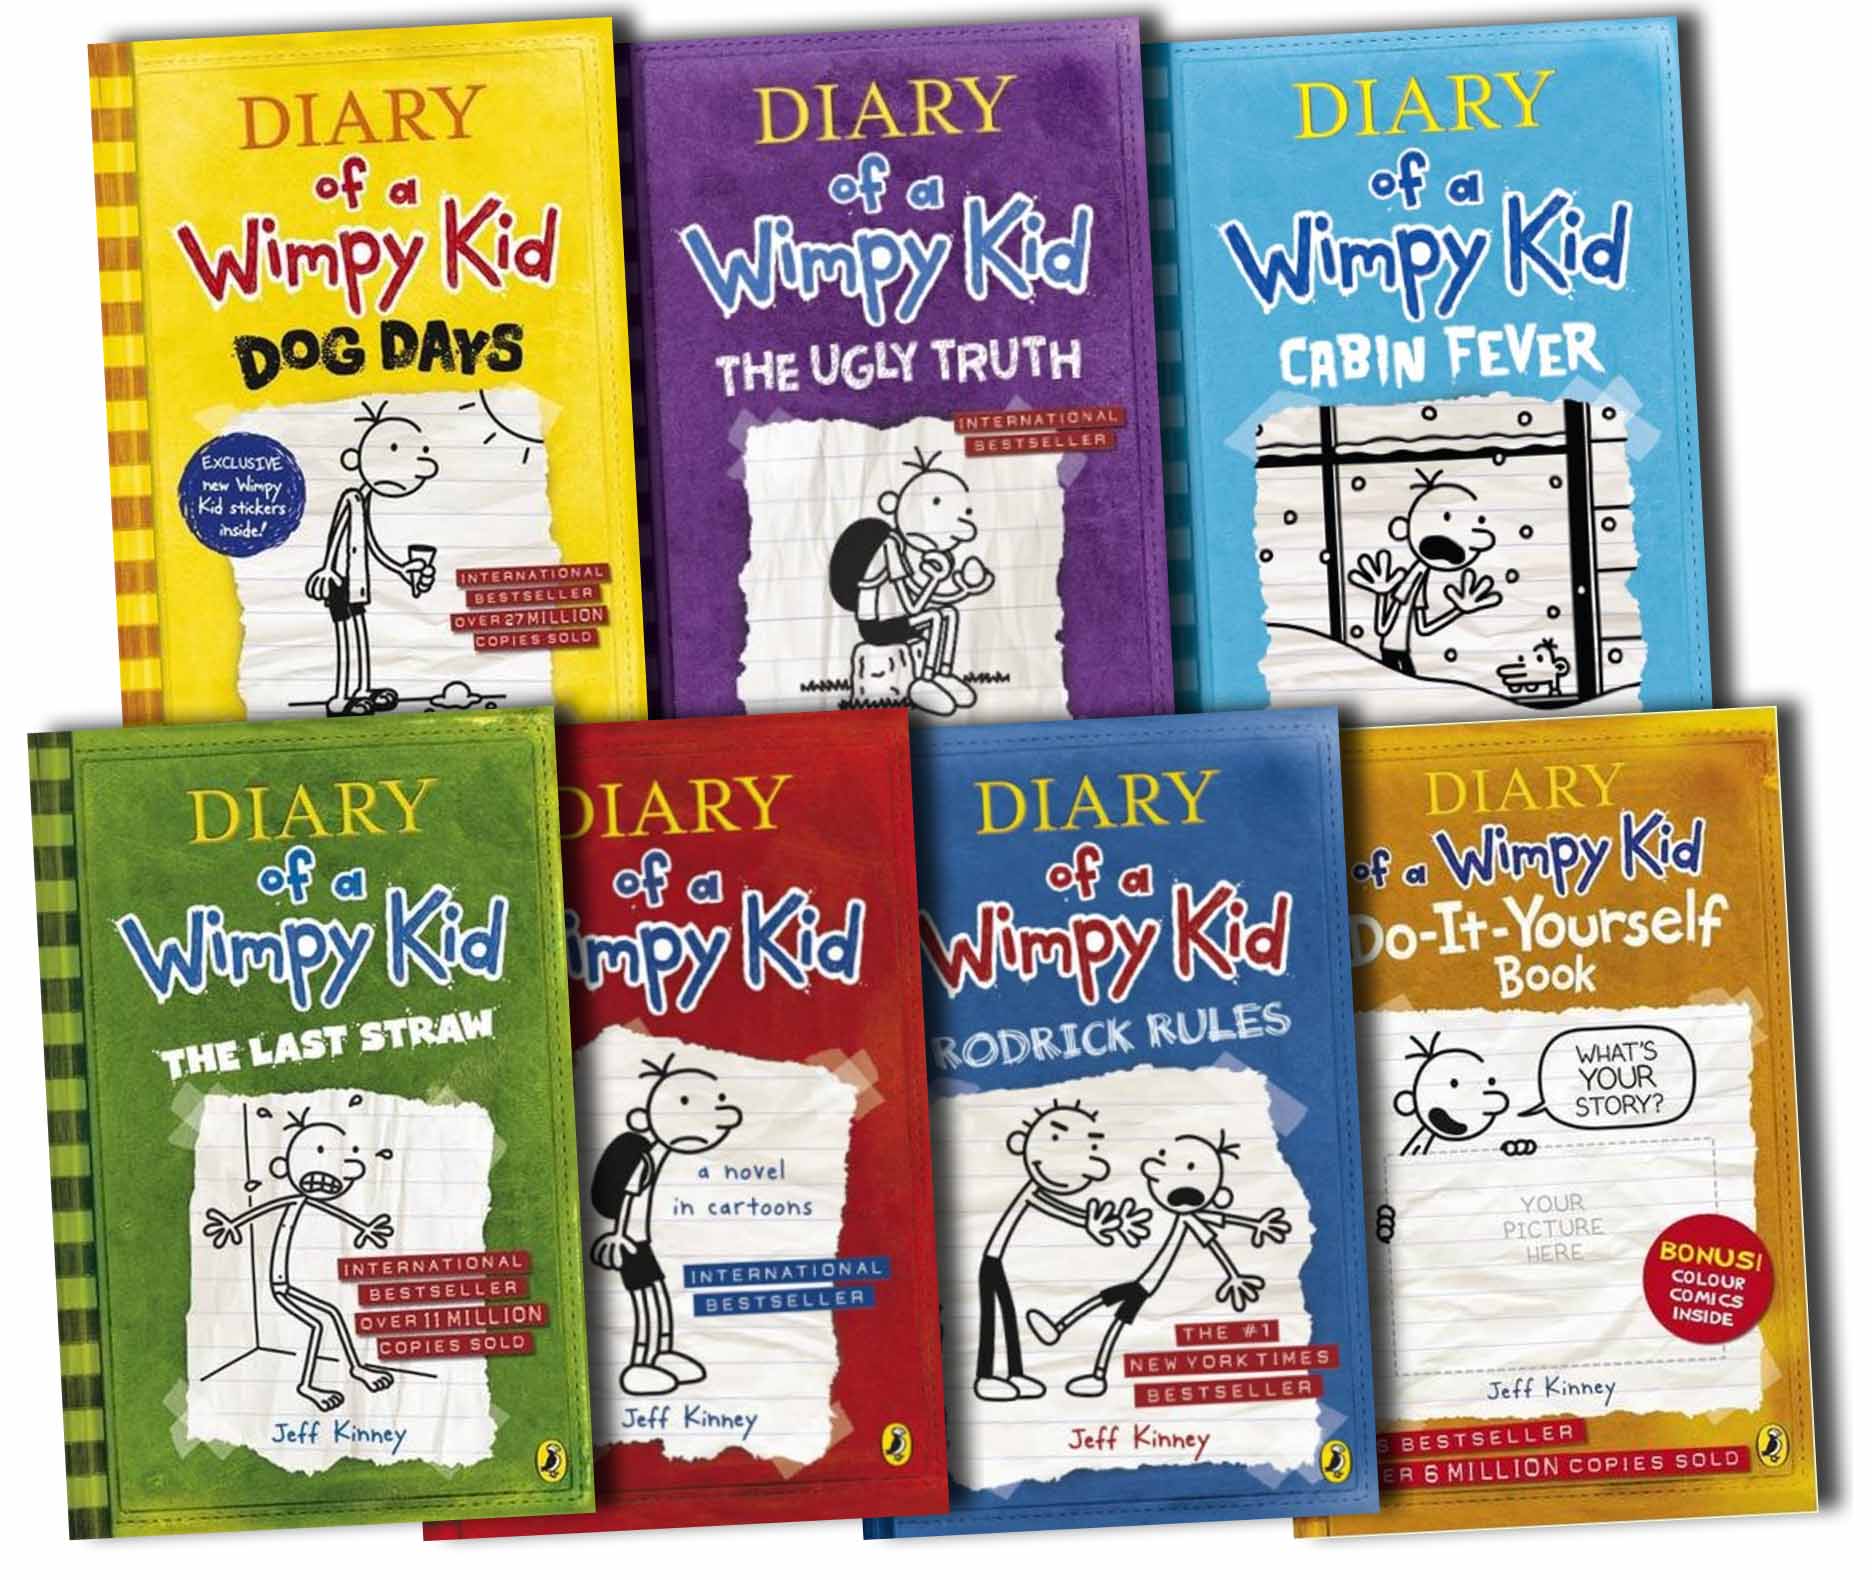 Diary of a Wimpy Kid Series Books Only 6.49 at Target